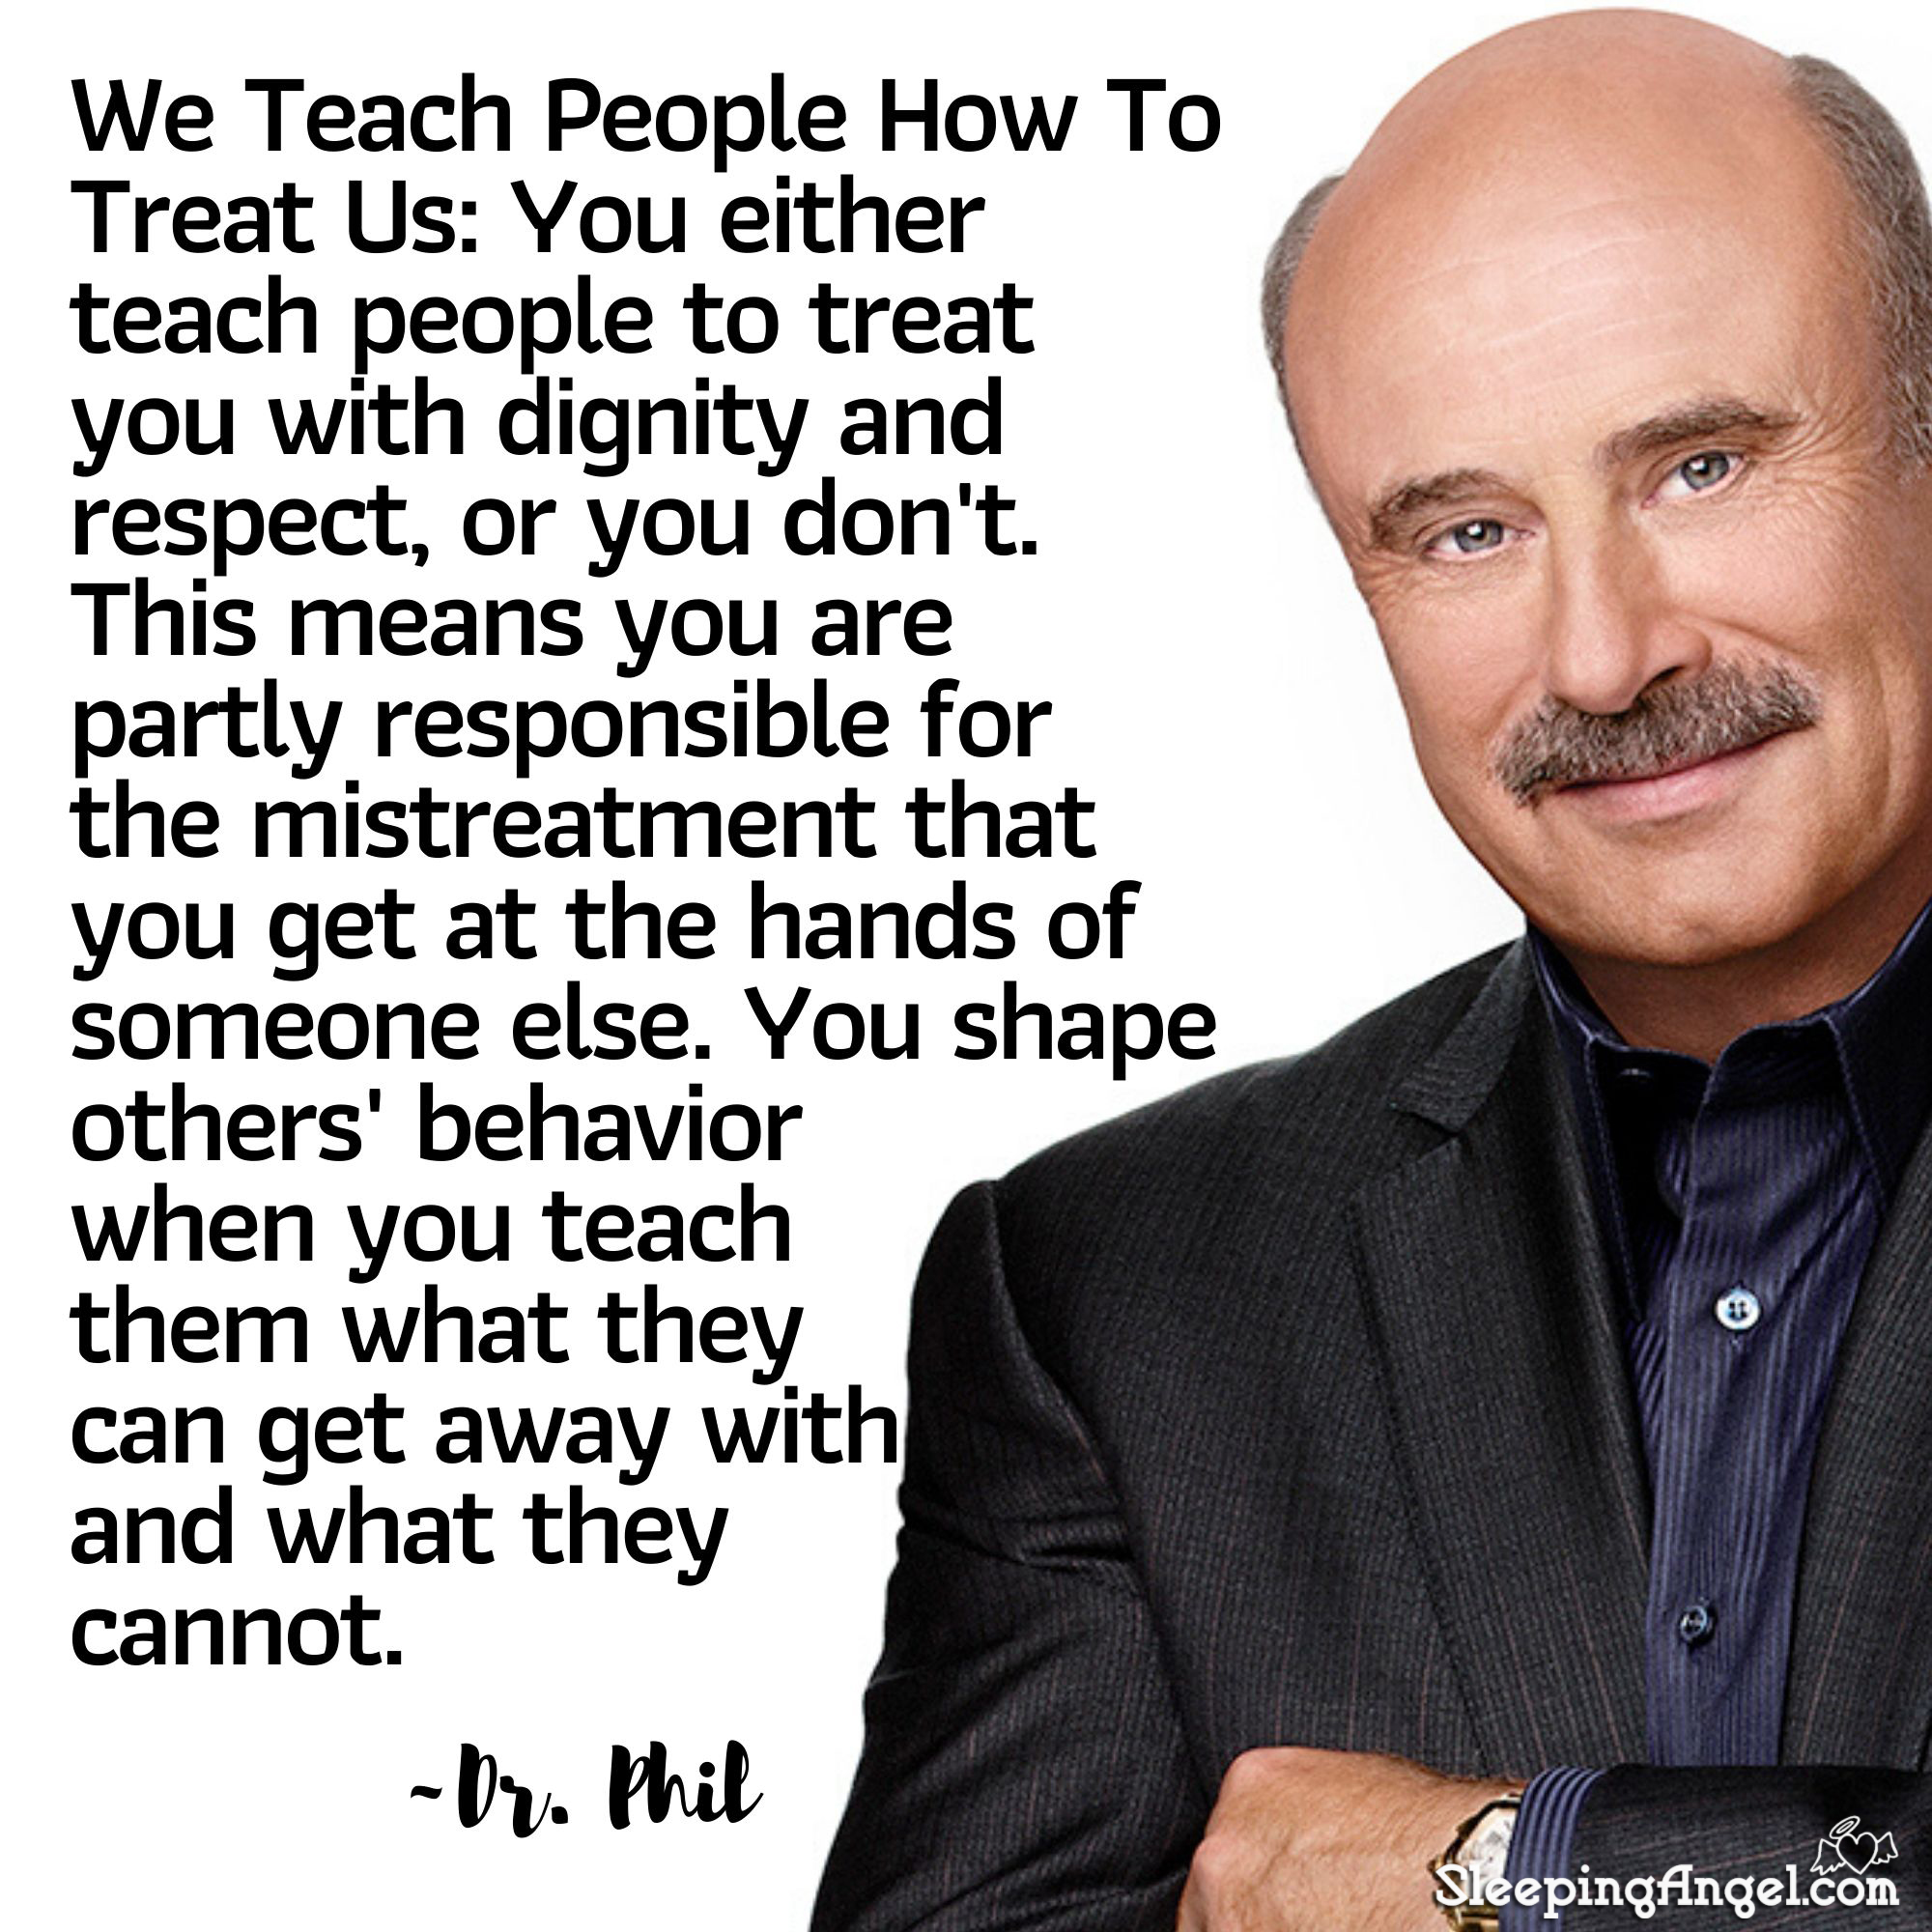 Dr. Phil Quote